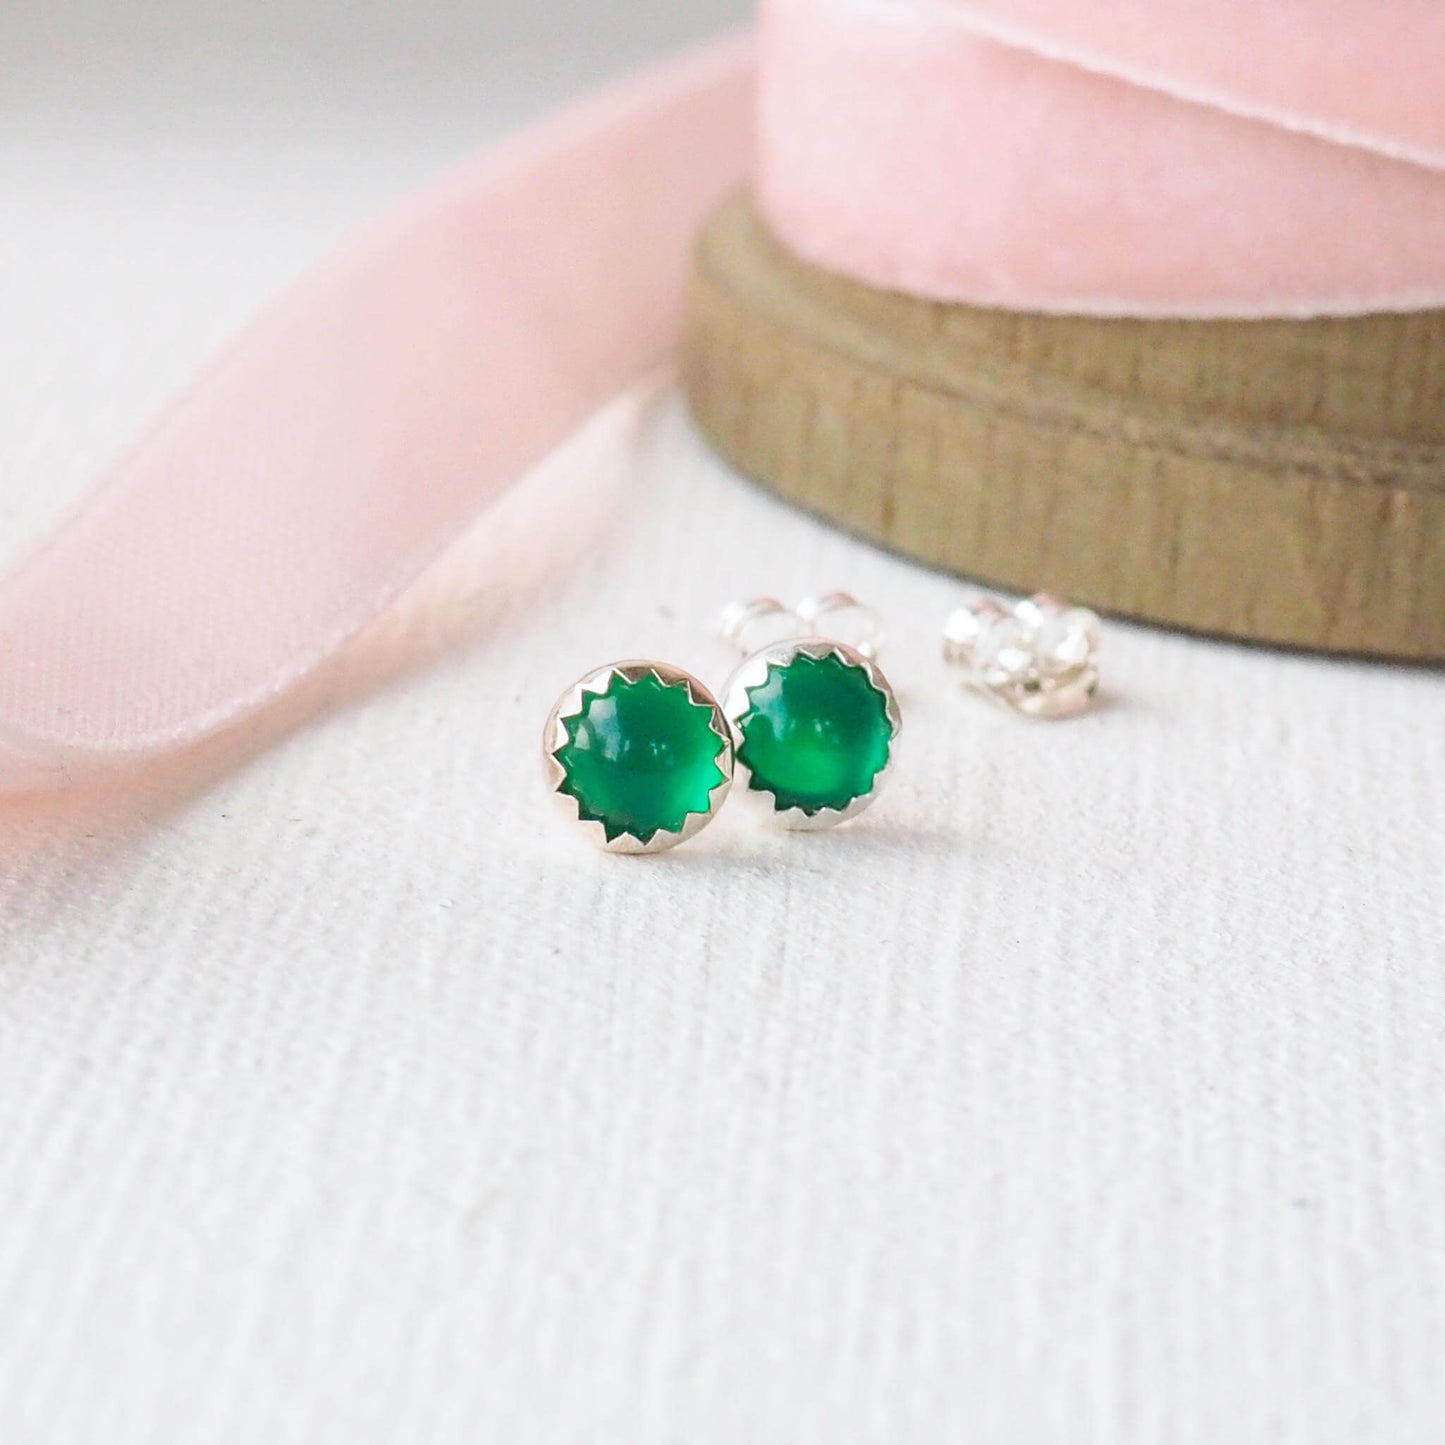 Simple round gemstone earrings in bright green agate, with a simple silver surround. minimalist in style, suitable for everyday earrings, pictures on a white textured background with gently pink ribbon